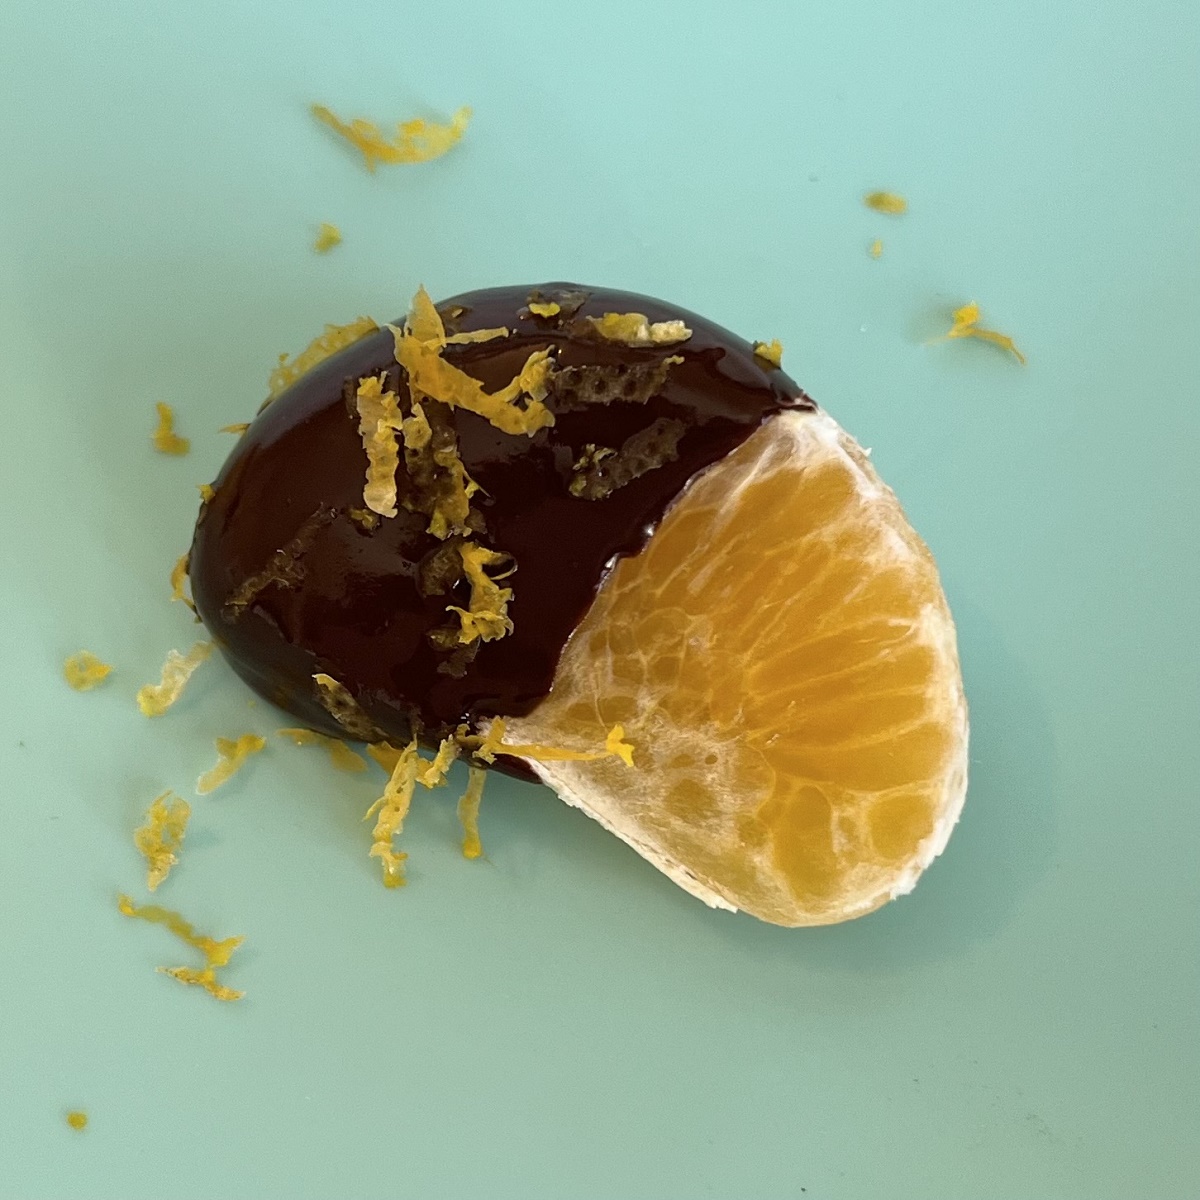 A single chocolate dipped clementine segment on a turquoise silicone baking mat.